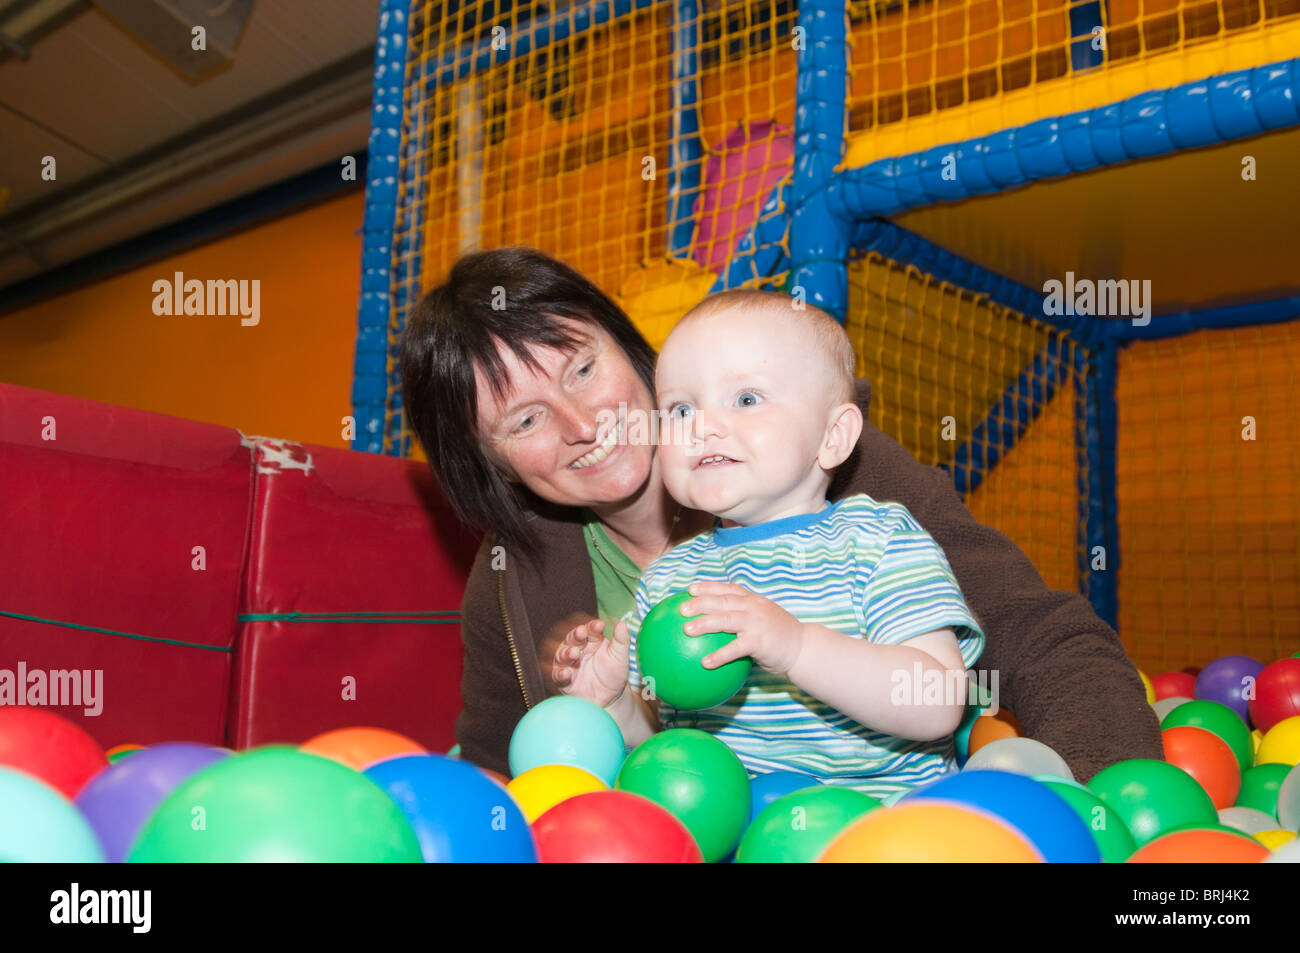 Mother and son in ball play pen Stock Photo